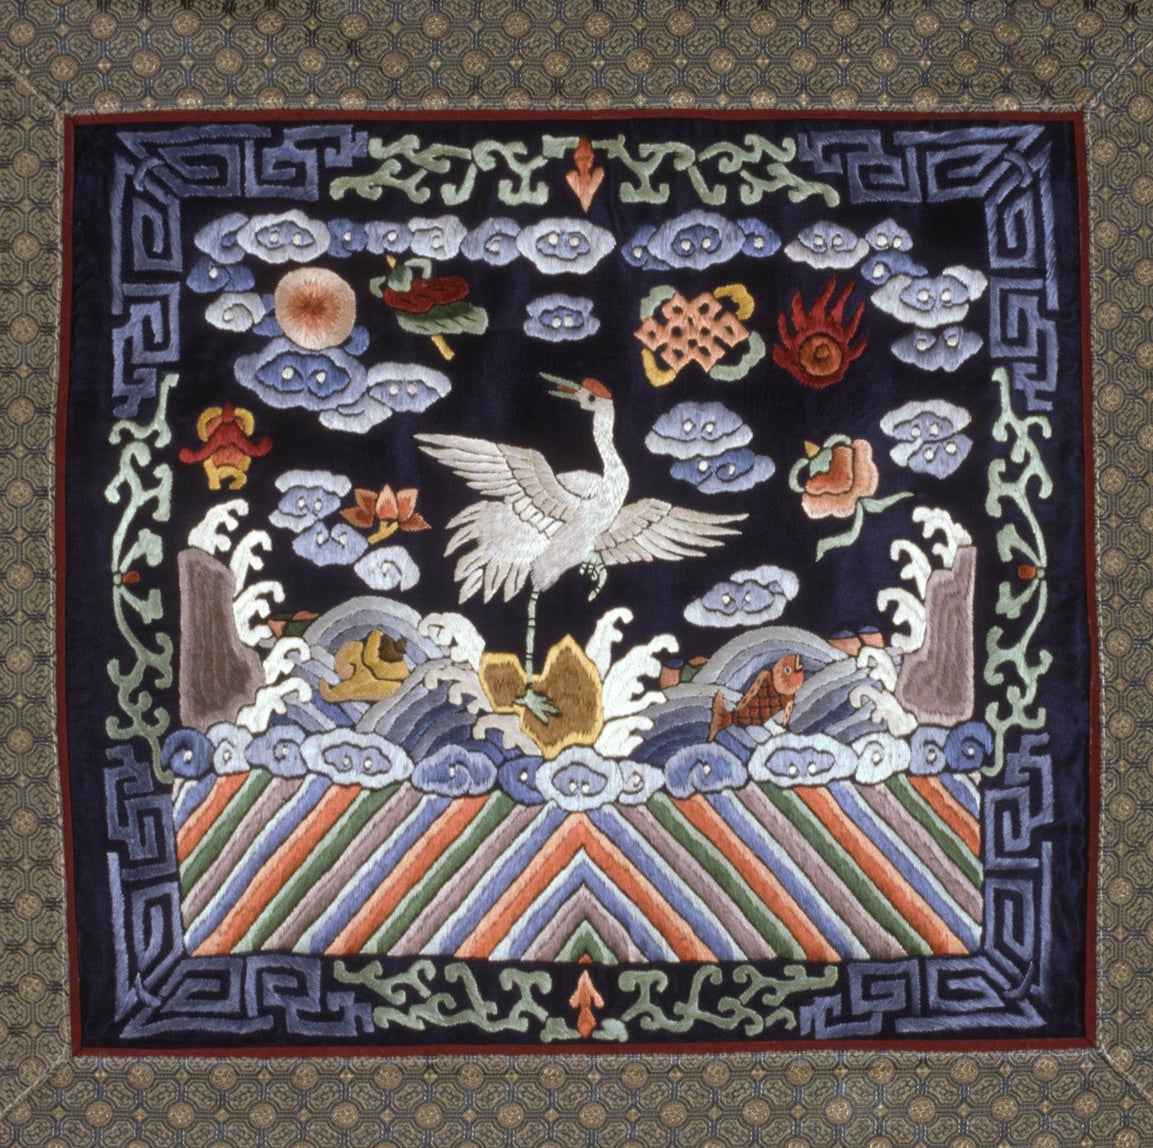 United States, Madison, Wisconsin, Helen Louise Allen Textile Collection